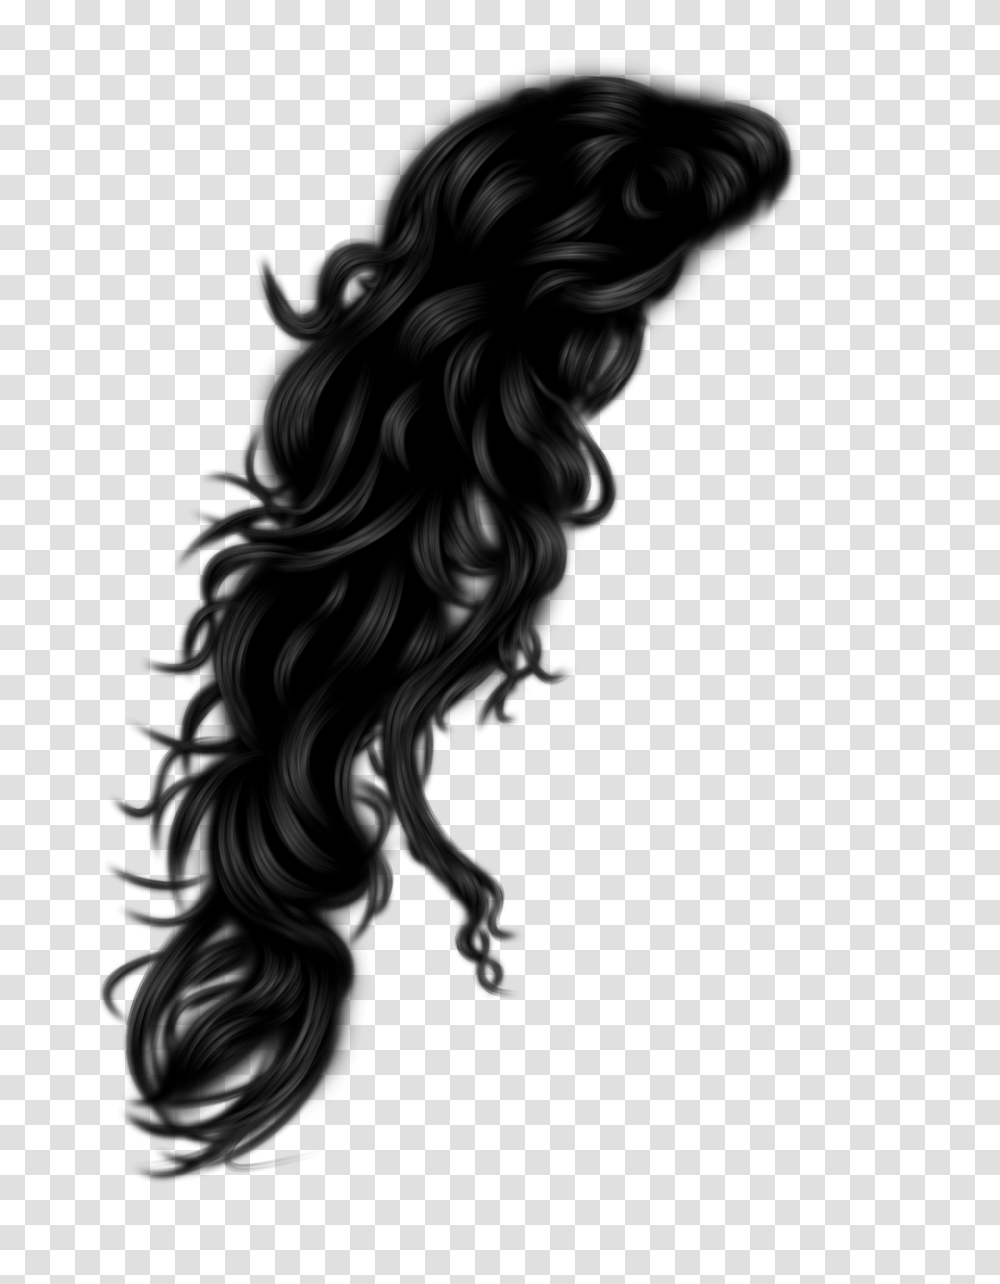 Hair Images Women And Men Hairs Images Download, Portrait, Face, Photography Transparent Png